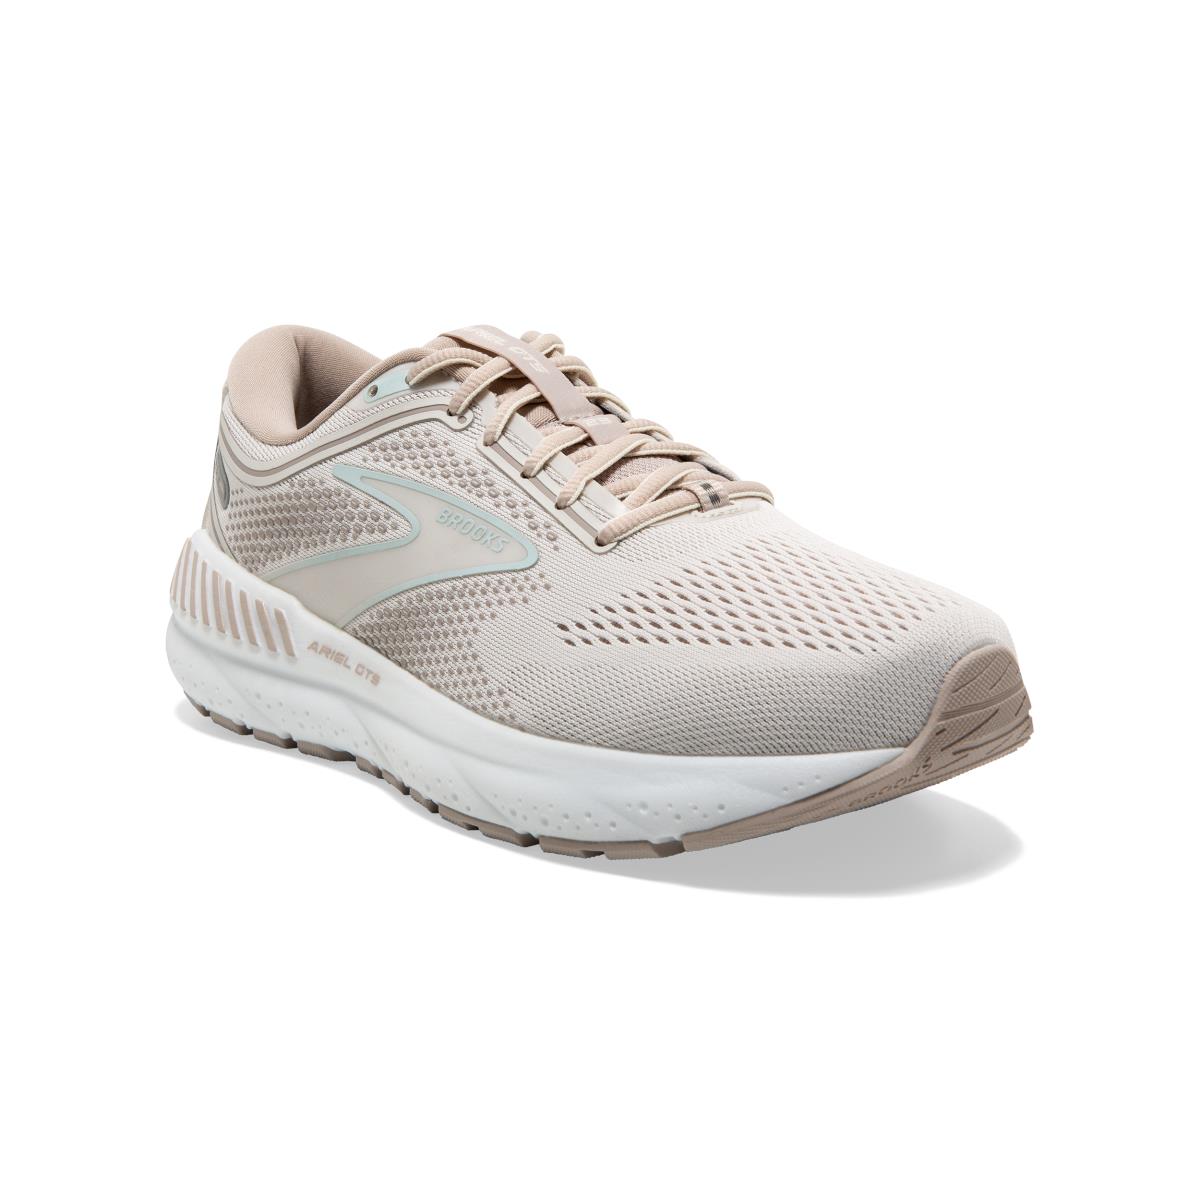 Brooks Ariel Gts 23 Women`s Road Running Shoes Chateau Grey/White Sand